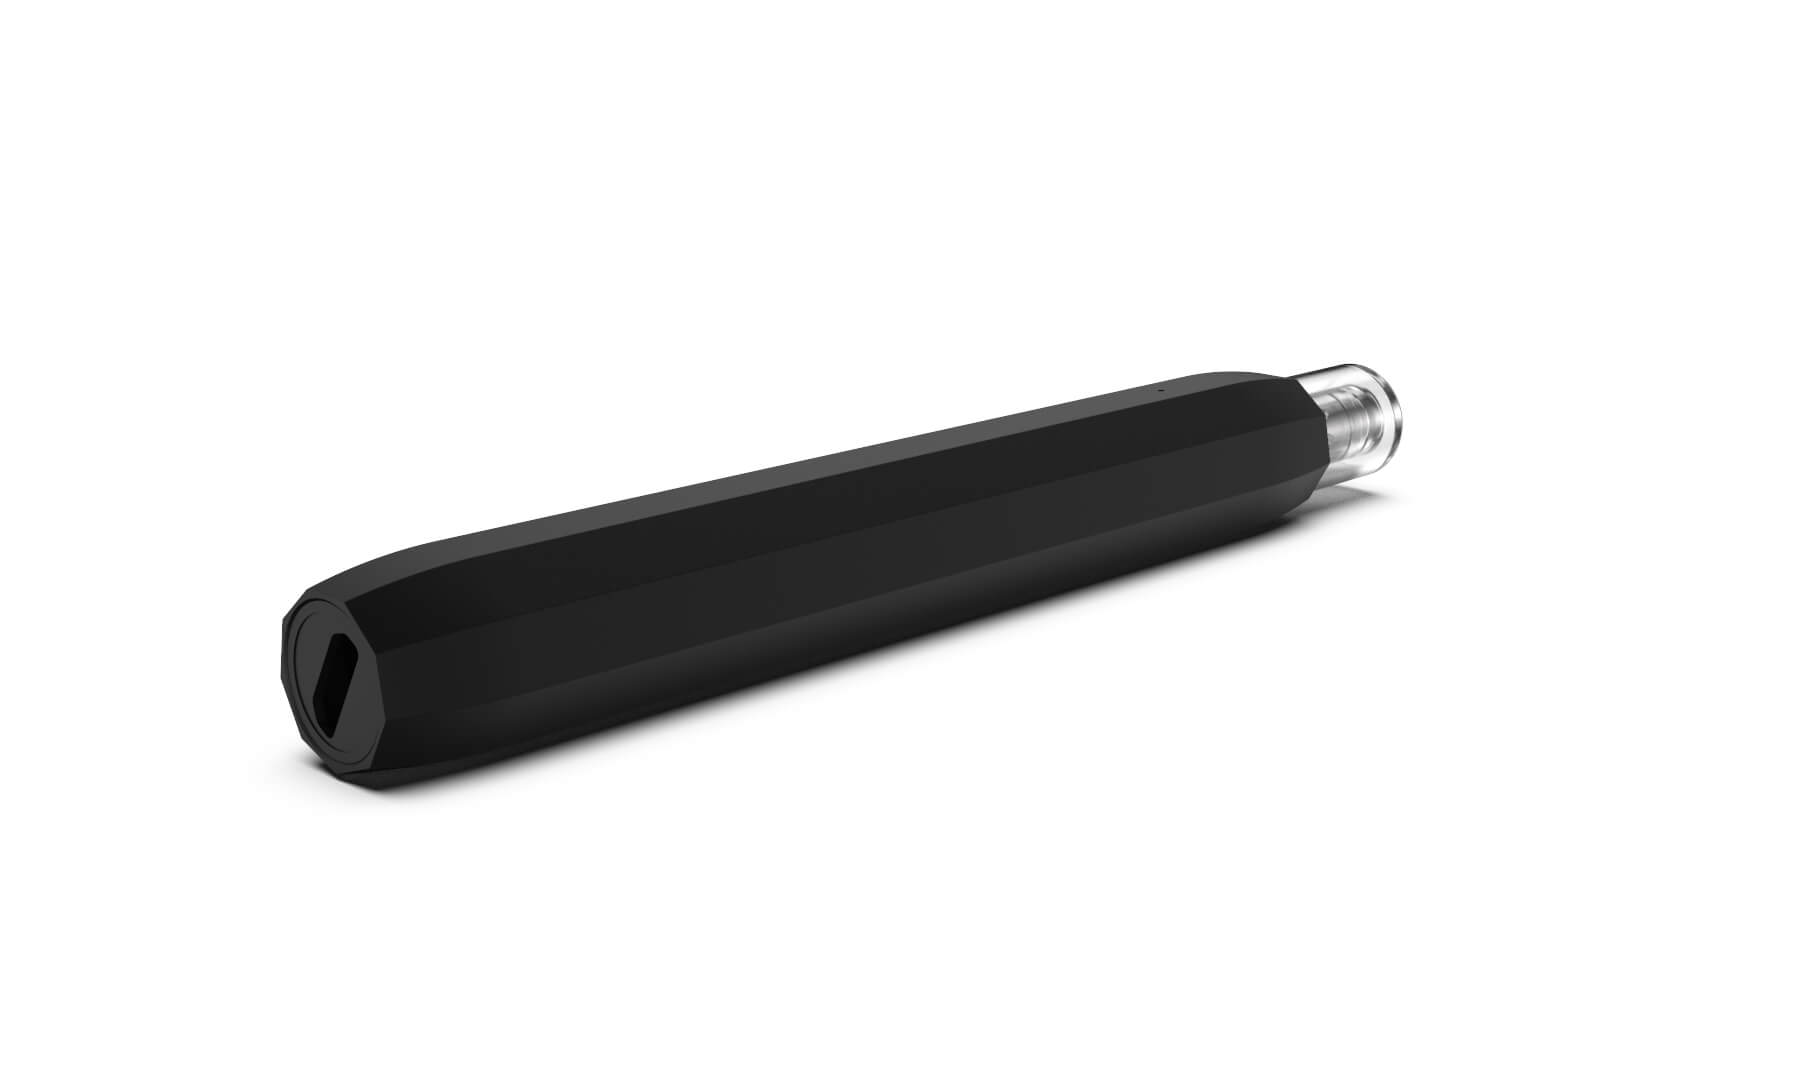 Unbranded Liquid9 Vaporizer Laying Down